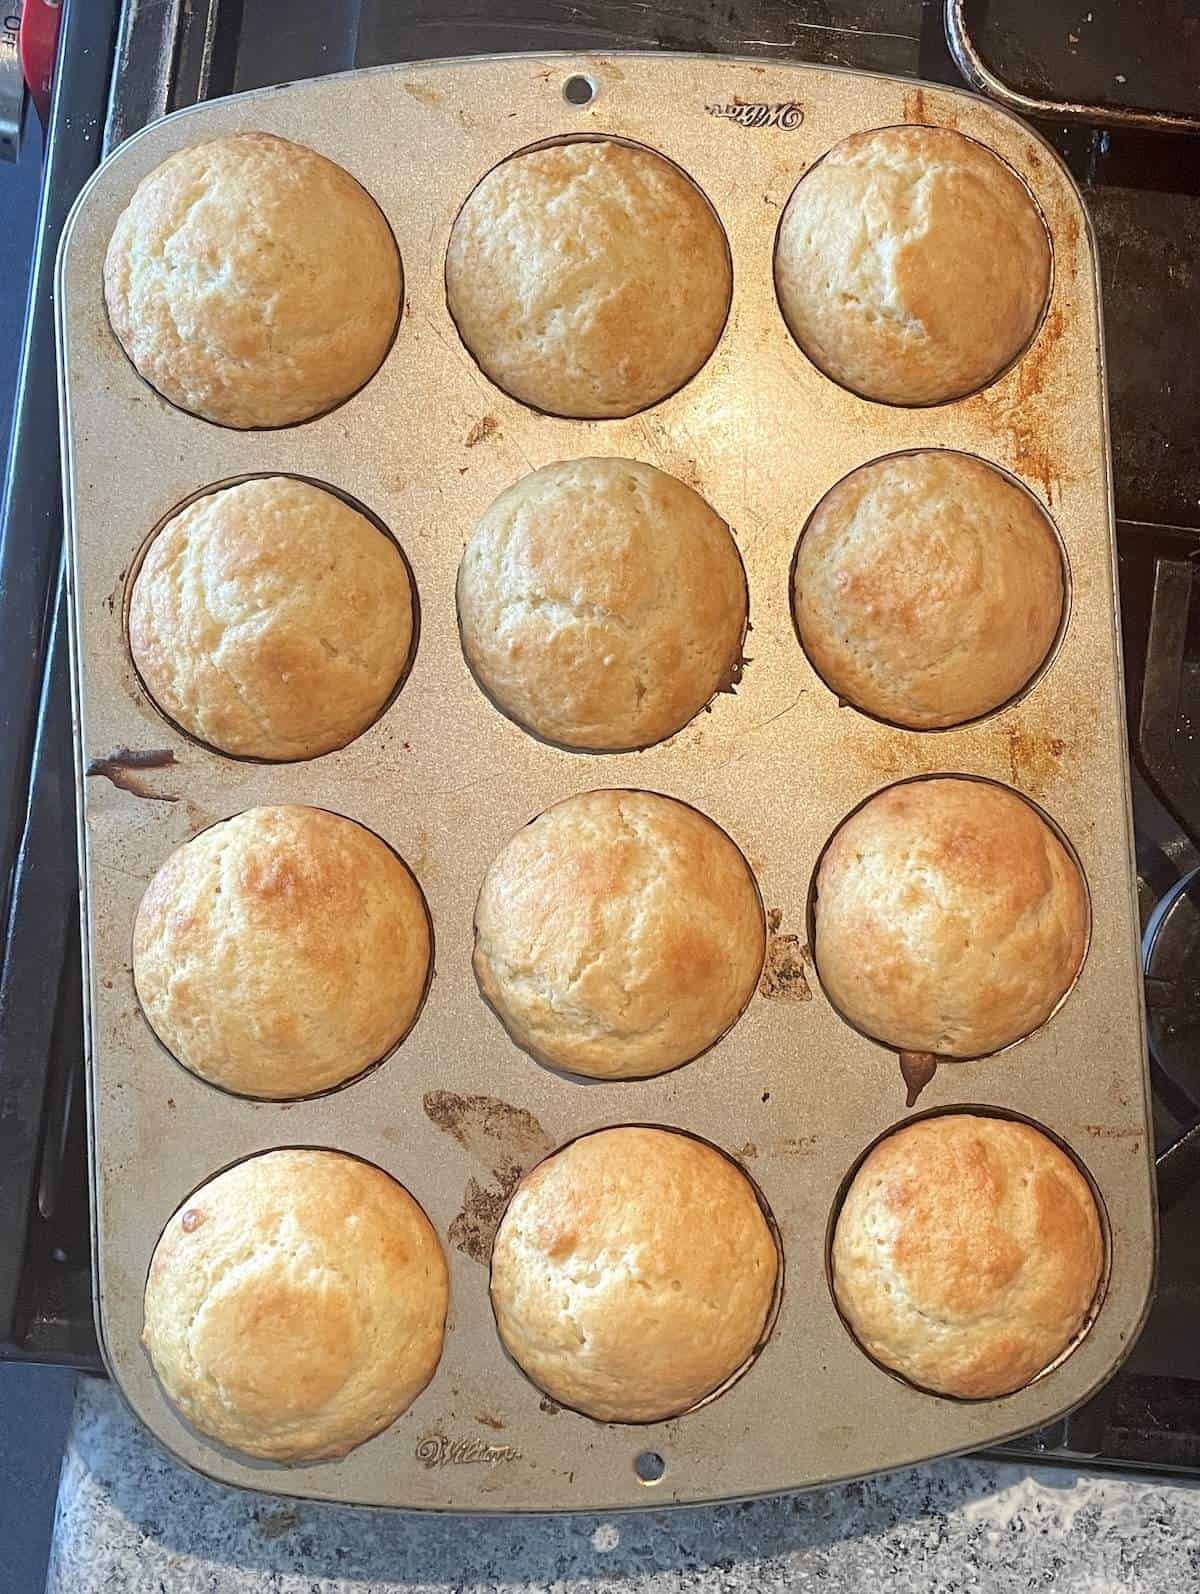 A pan of baked buttermilk muffins.